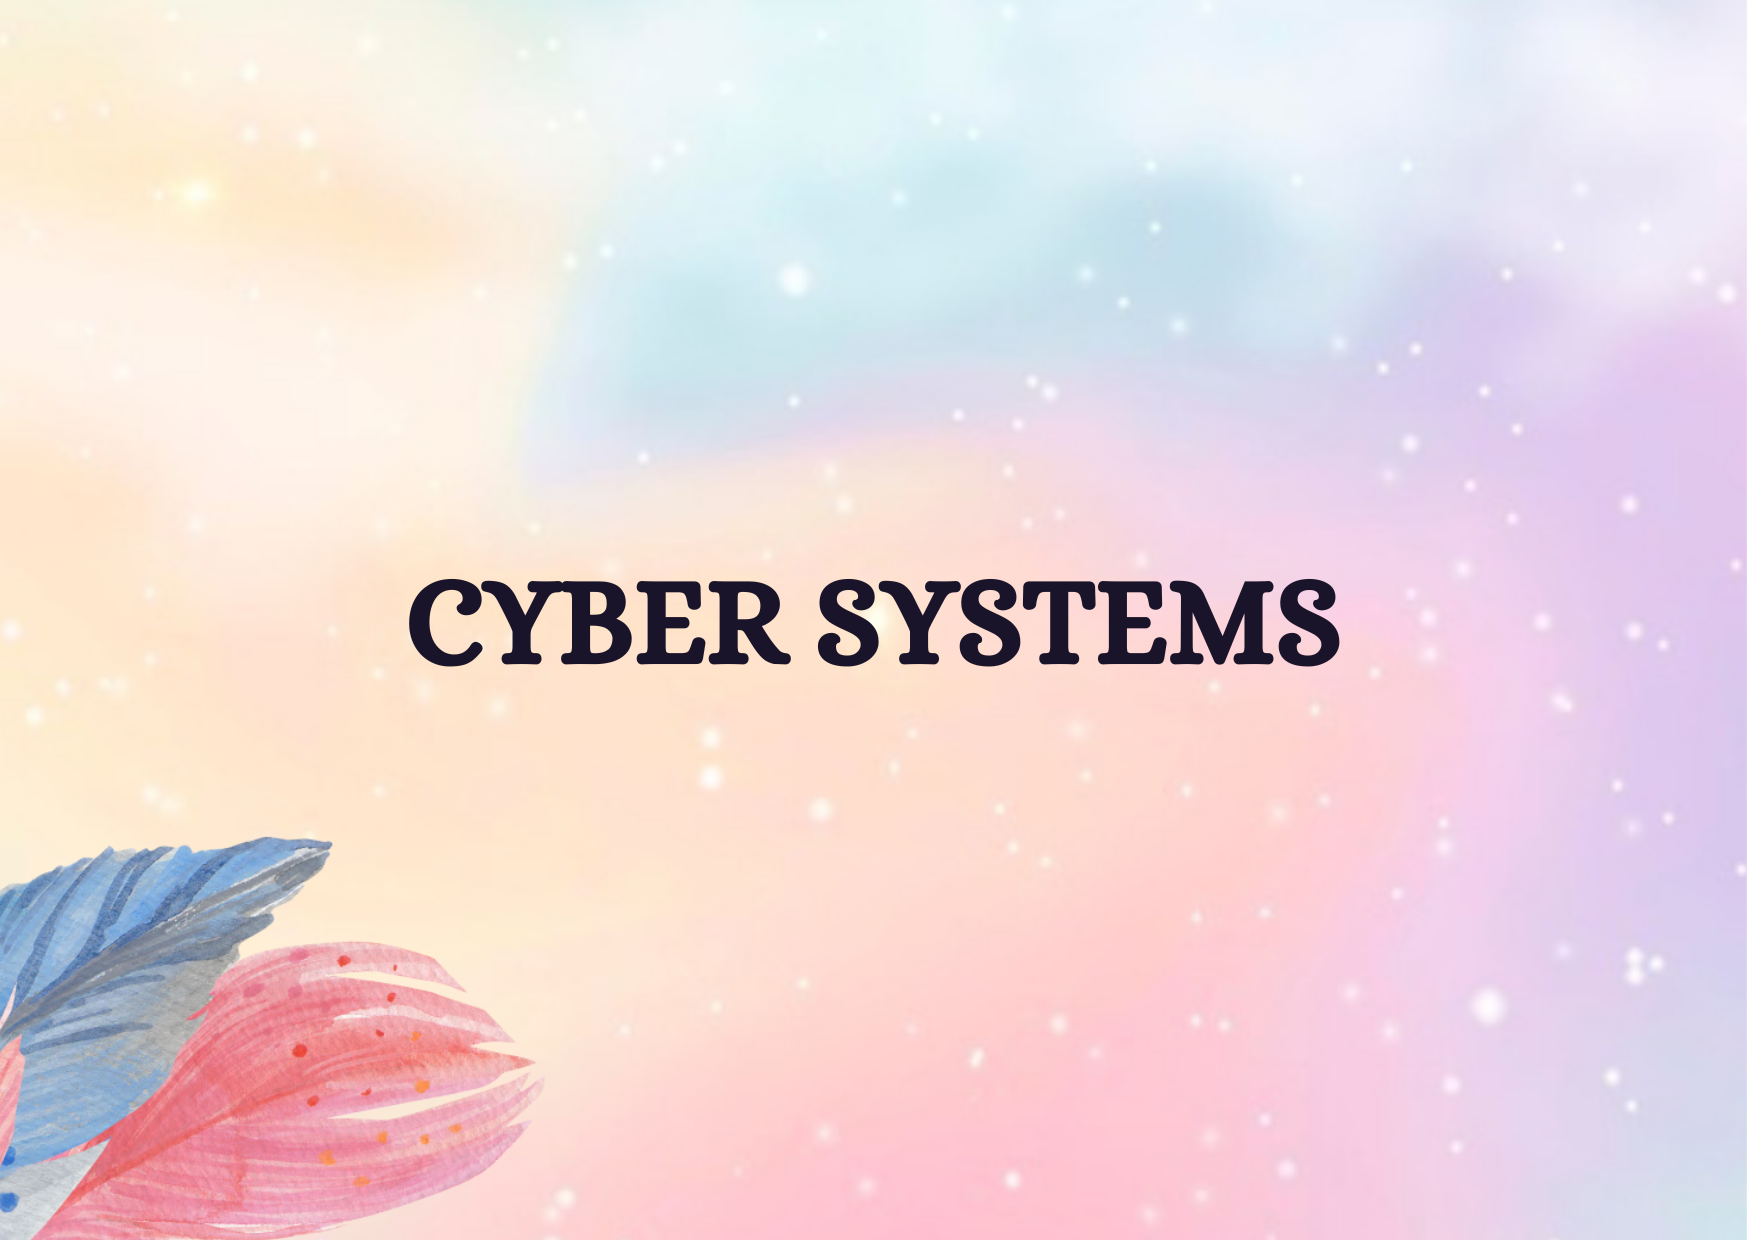  Cyber Systems,   